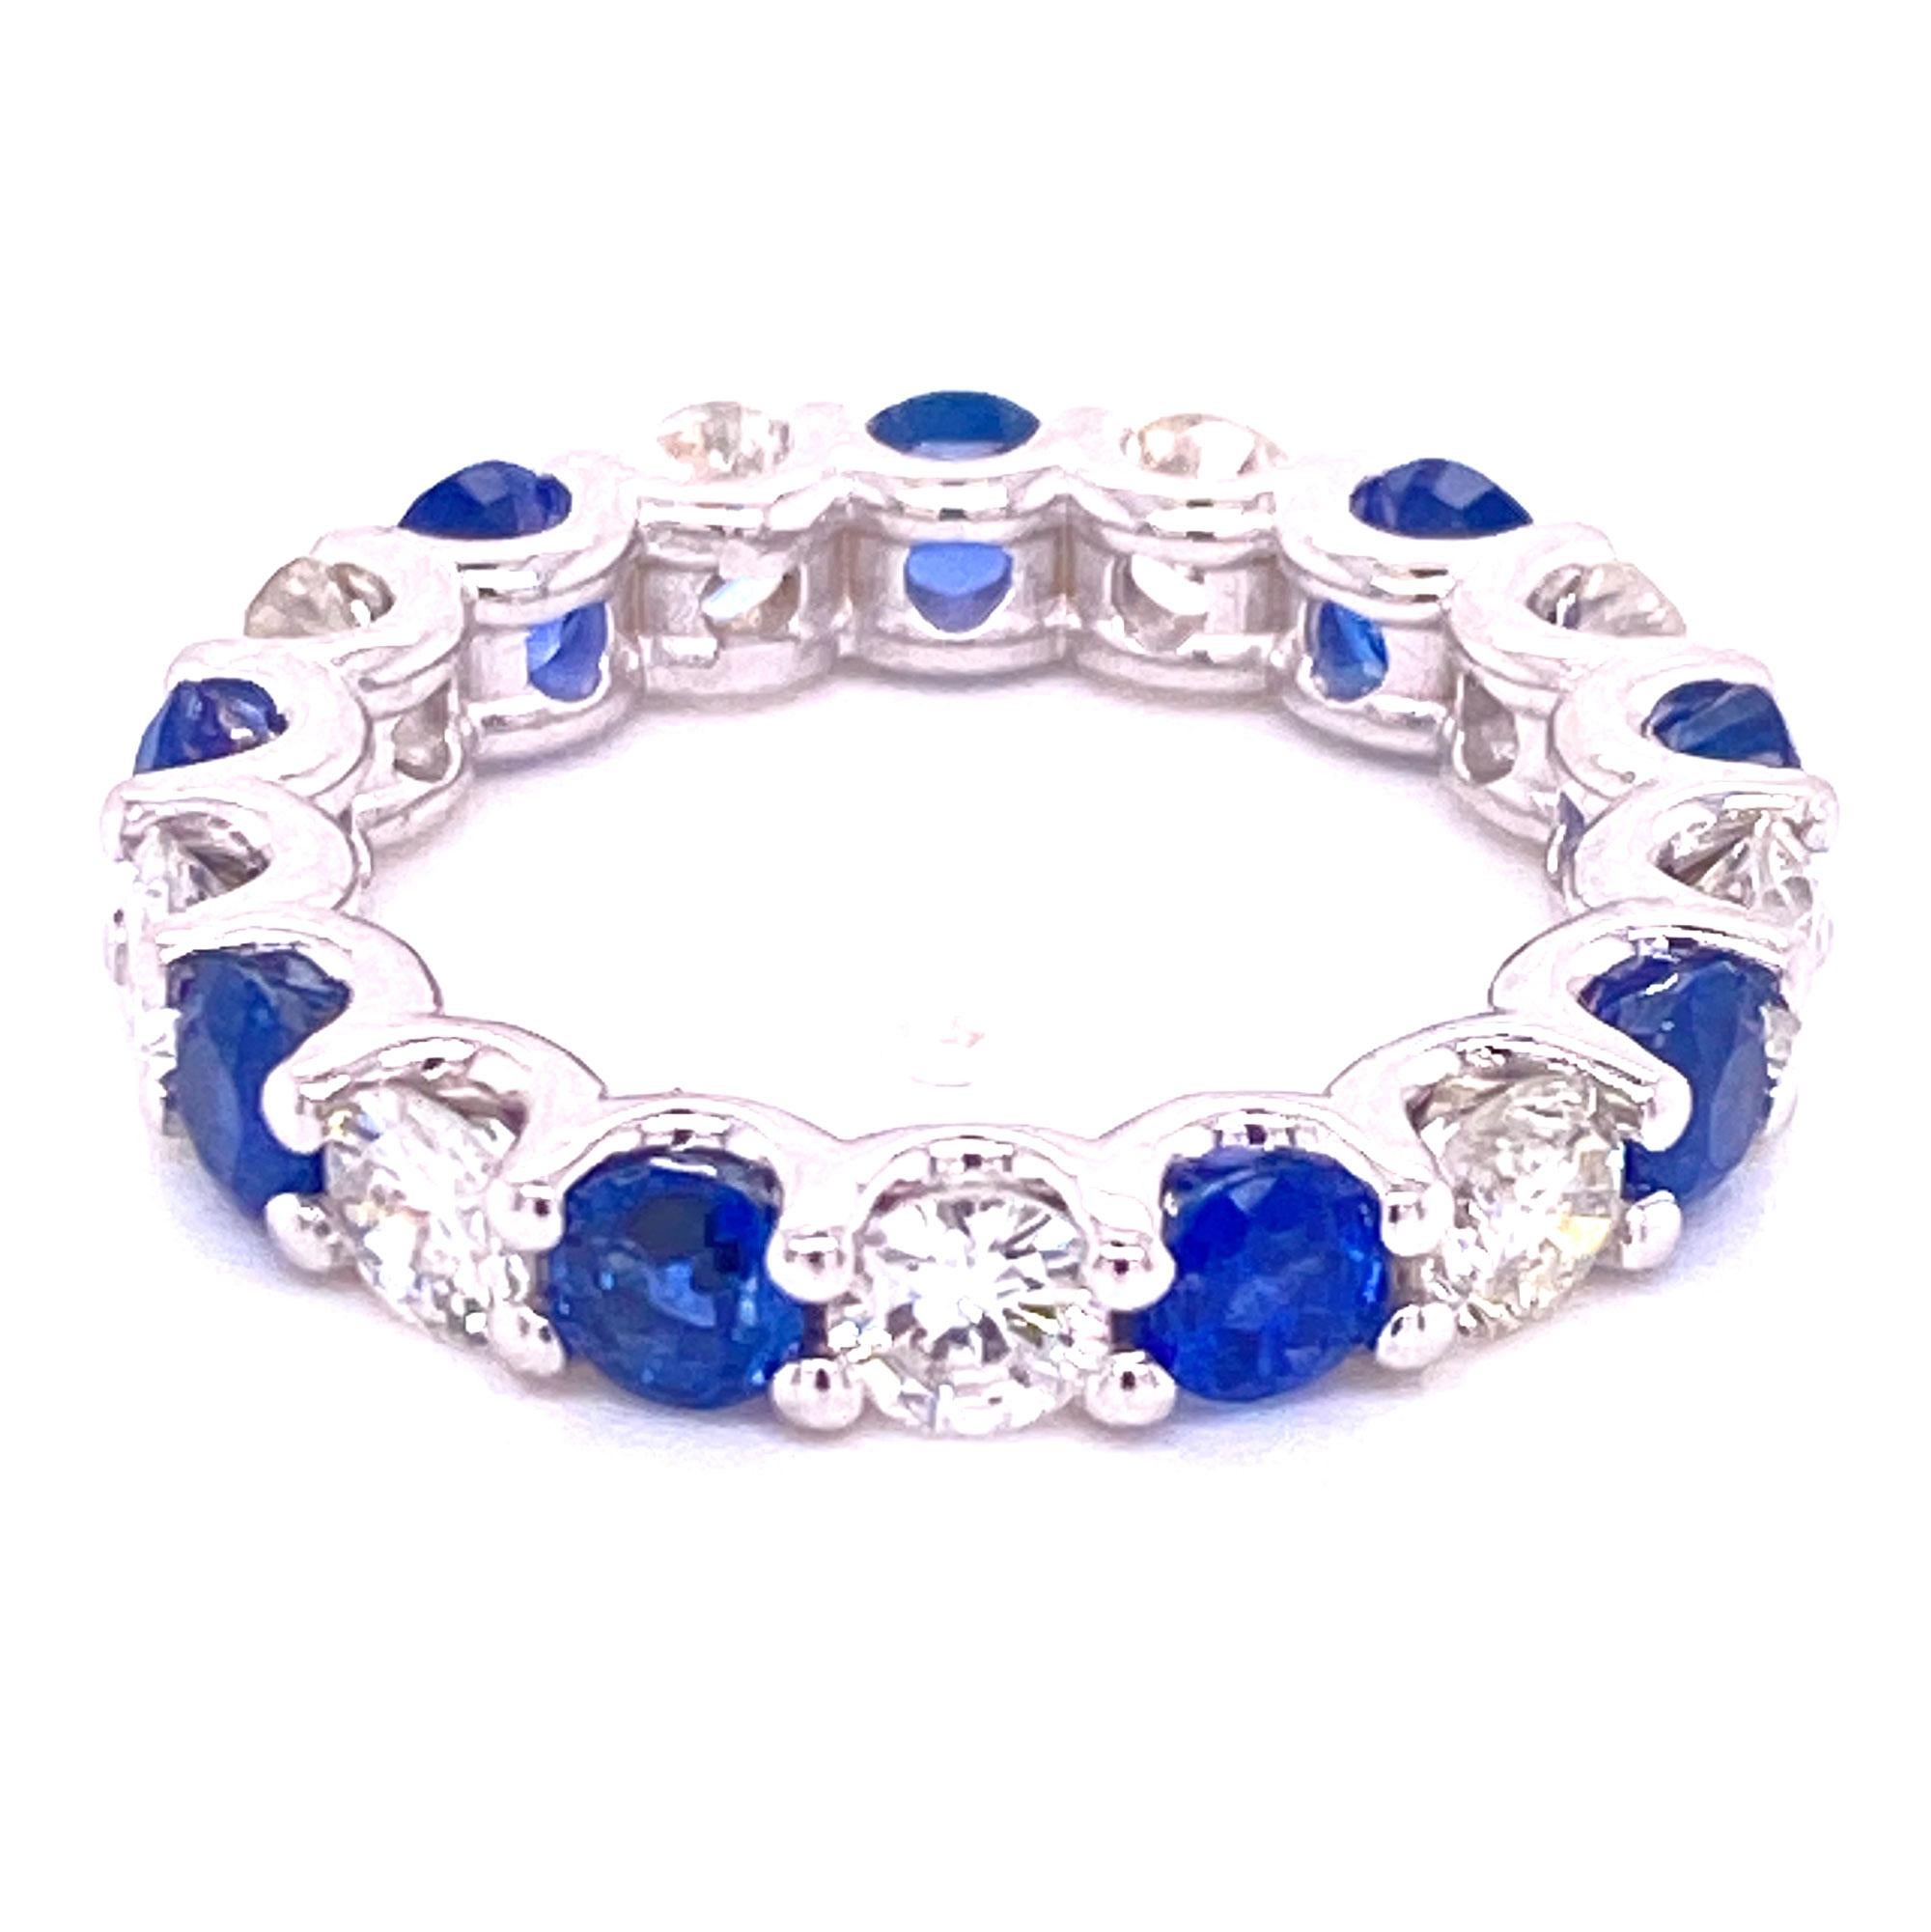 Beautiful round brilliant cut diamond and blue sapphire eternity band fashioned in 18 karat white gold U shape mounting. The band is size 6.5 and features 9 round brilliant cut diamonds (1.80 carat total weight), and 9 blue round sapphires (2.40